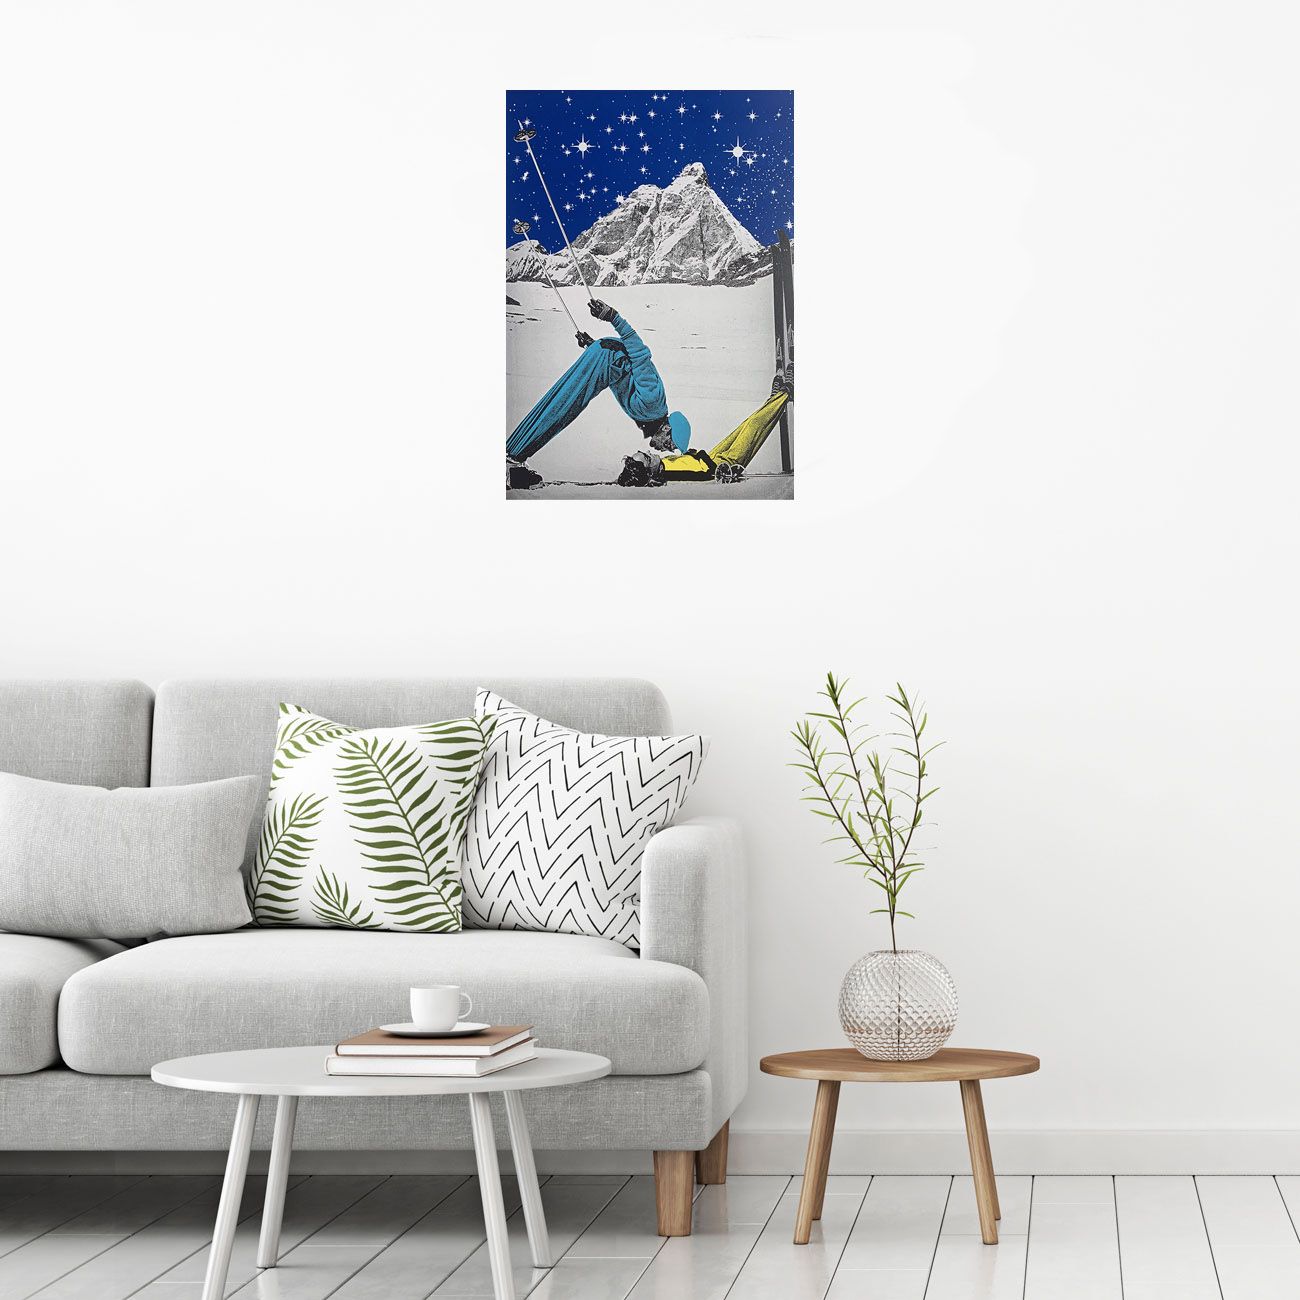 Ski paradise by Anne Storno - Secondary Image